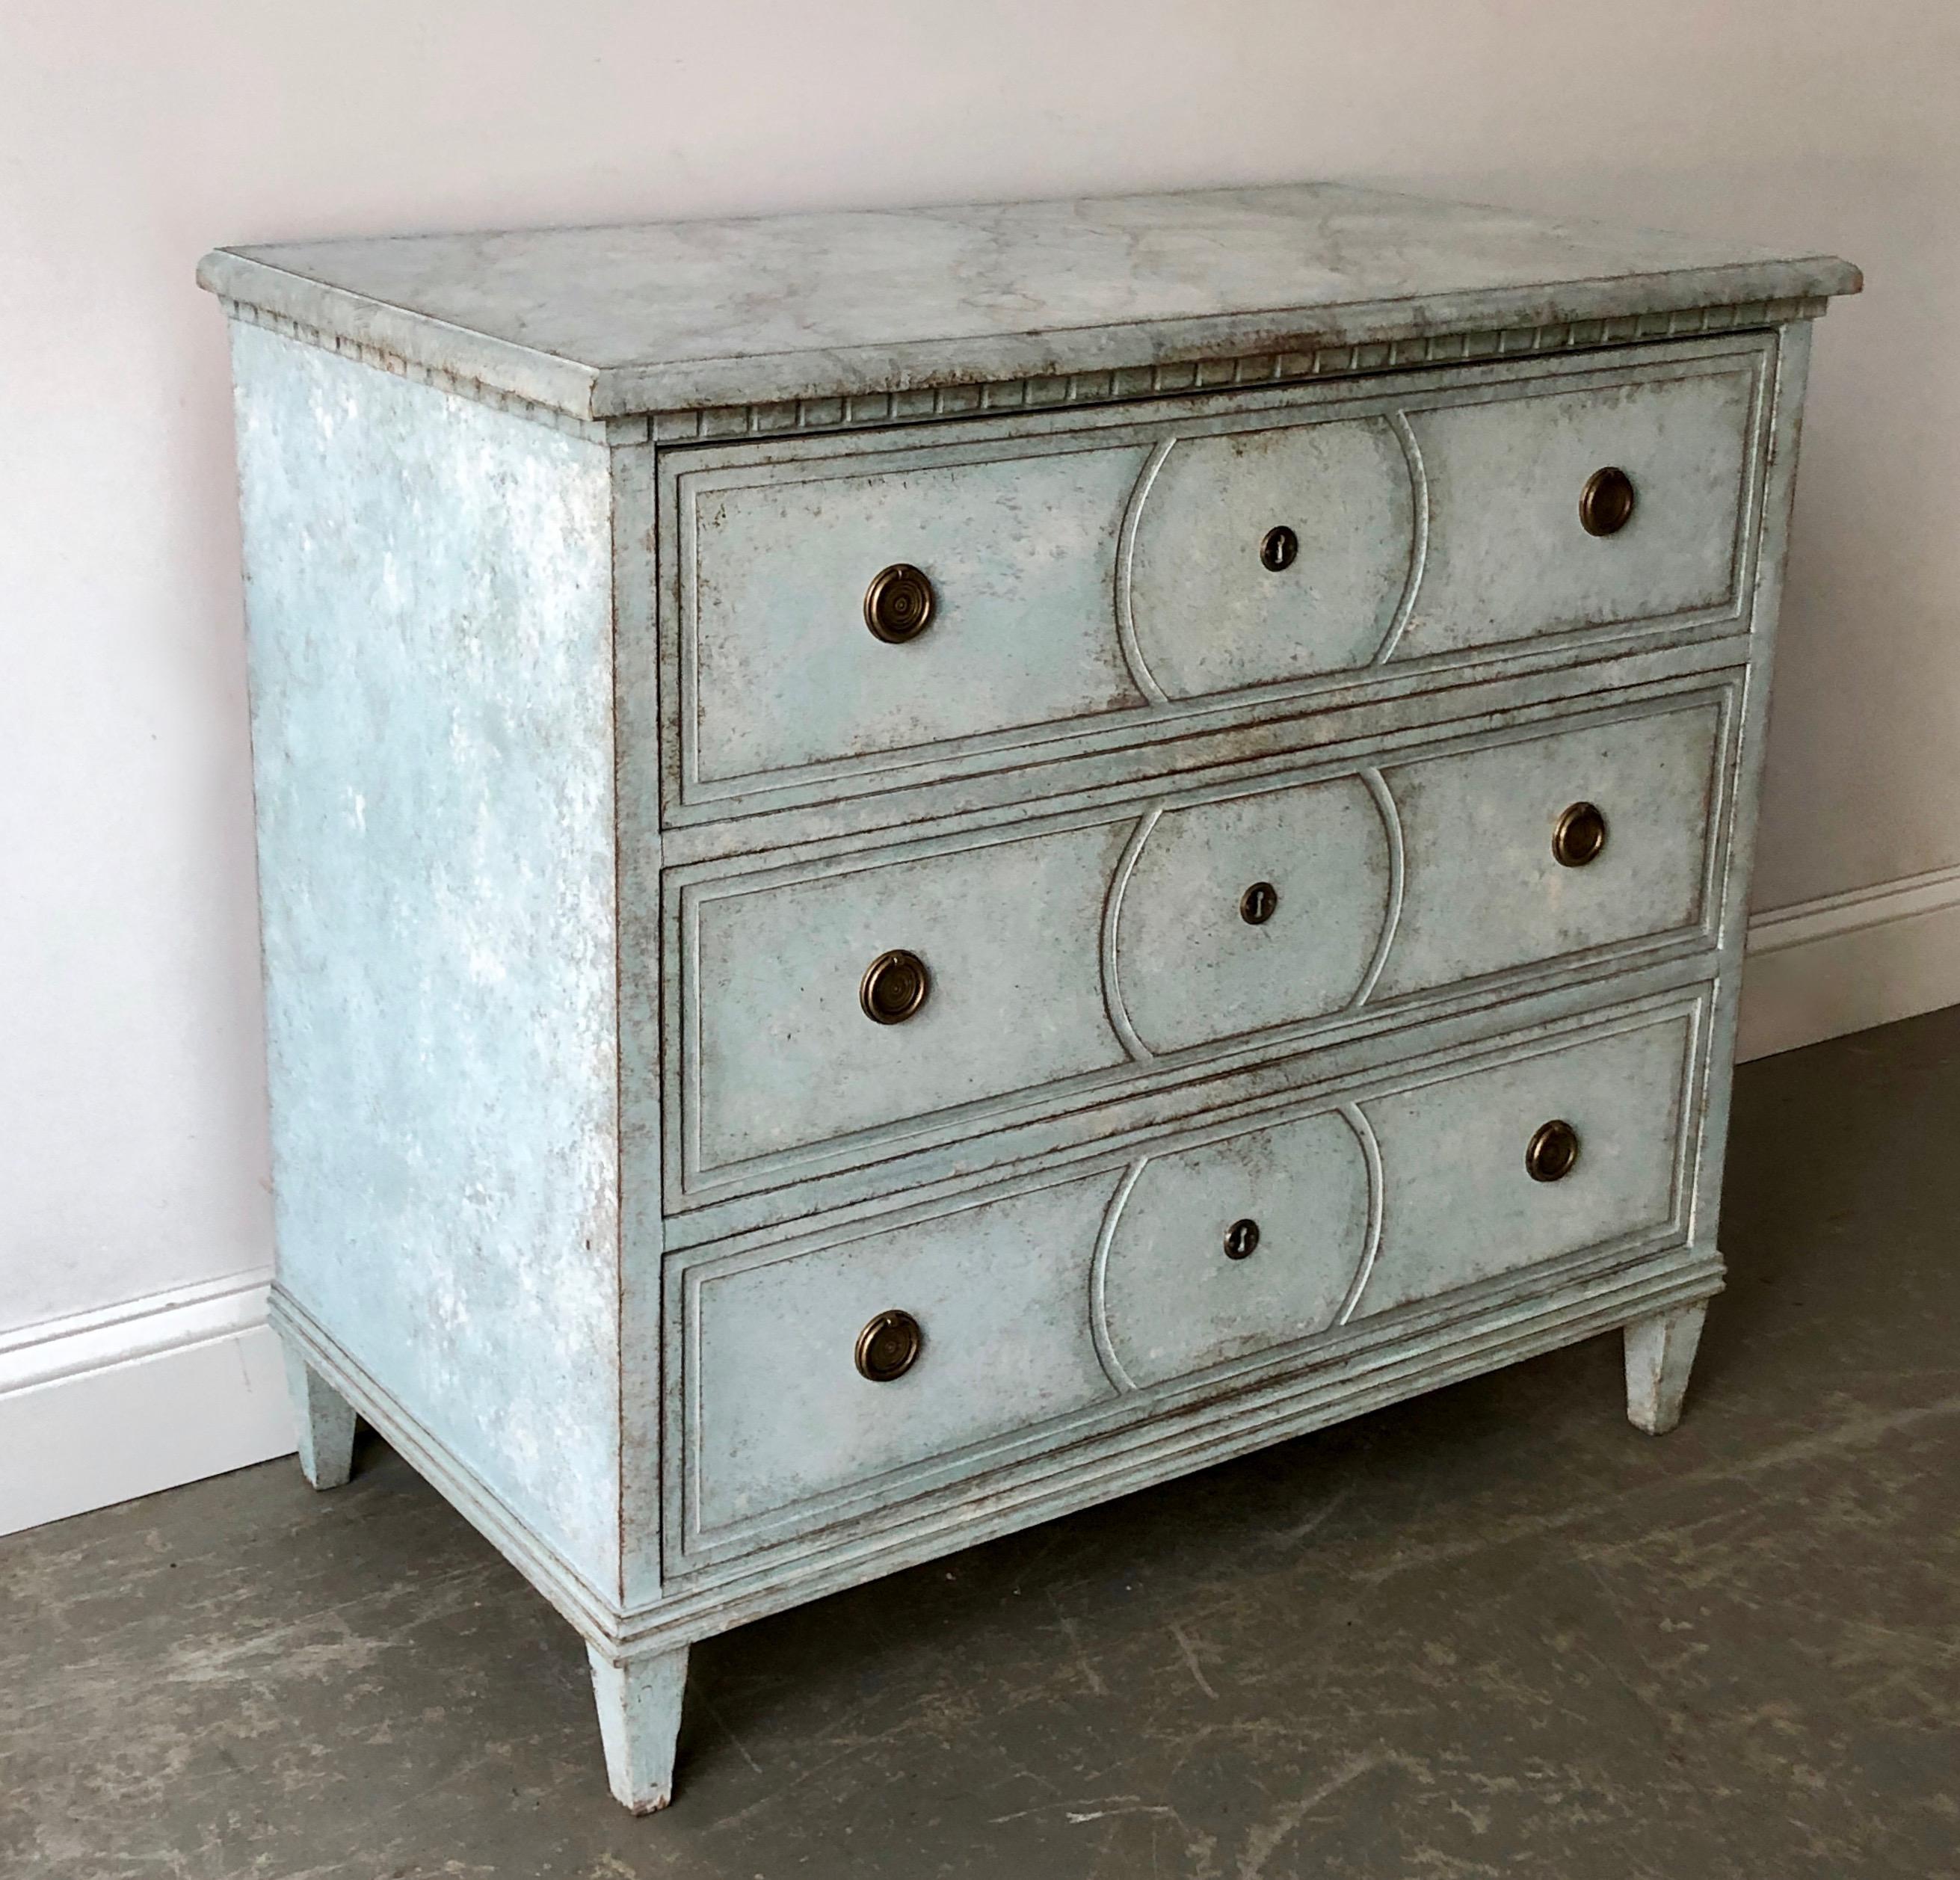 19th century Swedish chest of drawers with shaped drawer front panels with circular details, marblezed wooden top with dentil details and fluted corner posts on tapered feet. Later paint.
More than ever, we selected the best, the rarest, the